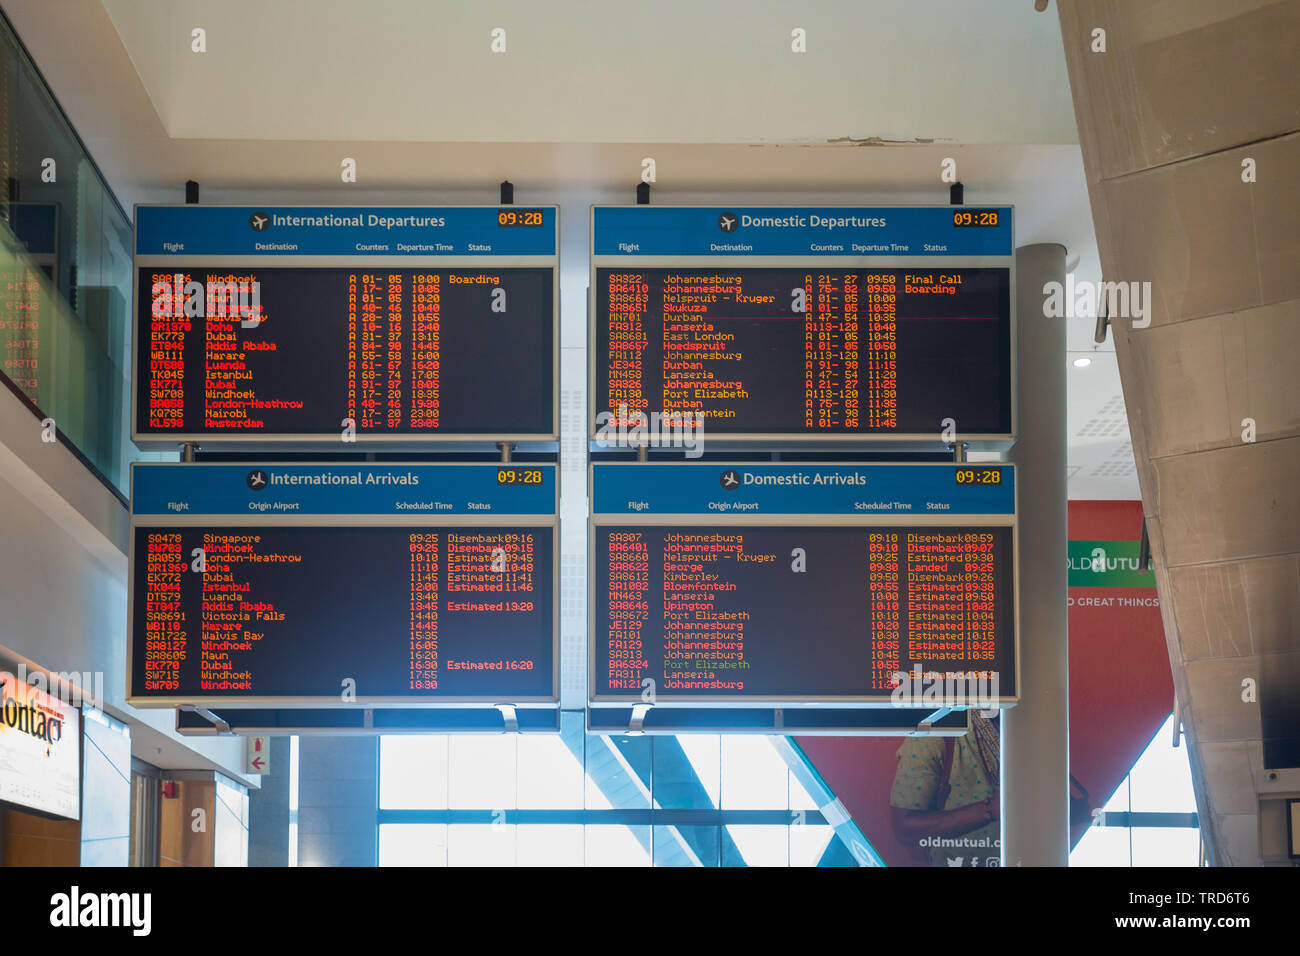 International and Domestic departure and arrival boards with flight schedules, times and status information at Cape Town airport, South Africa Stock Photo